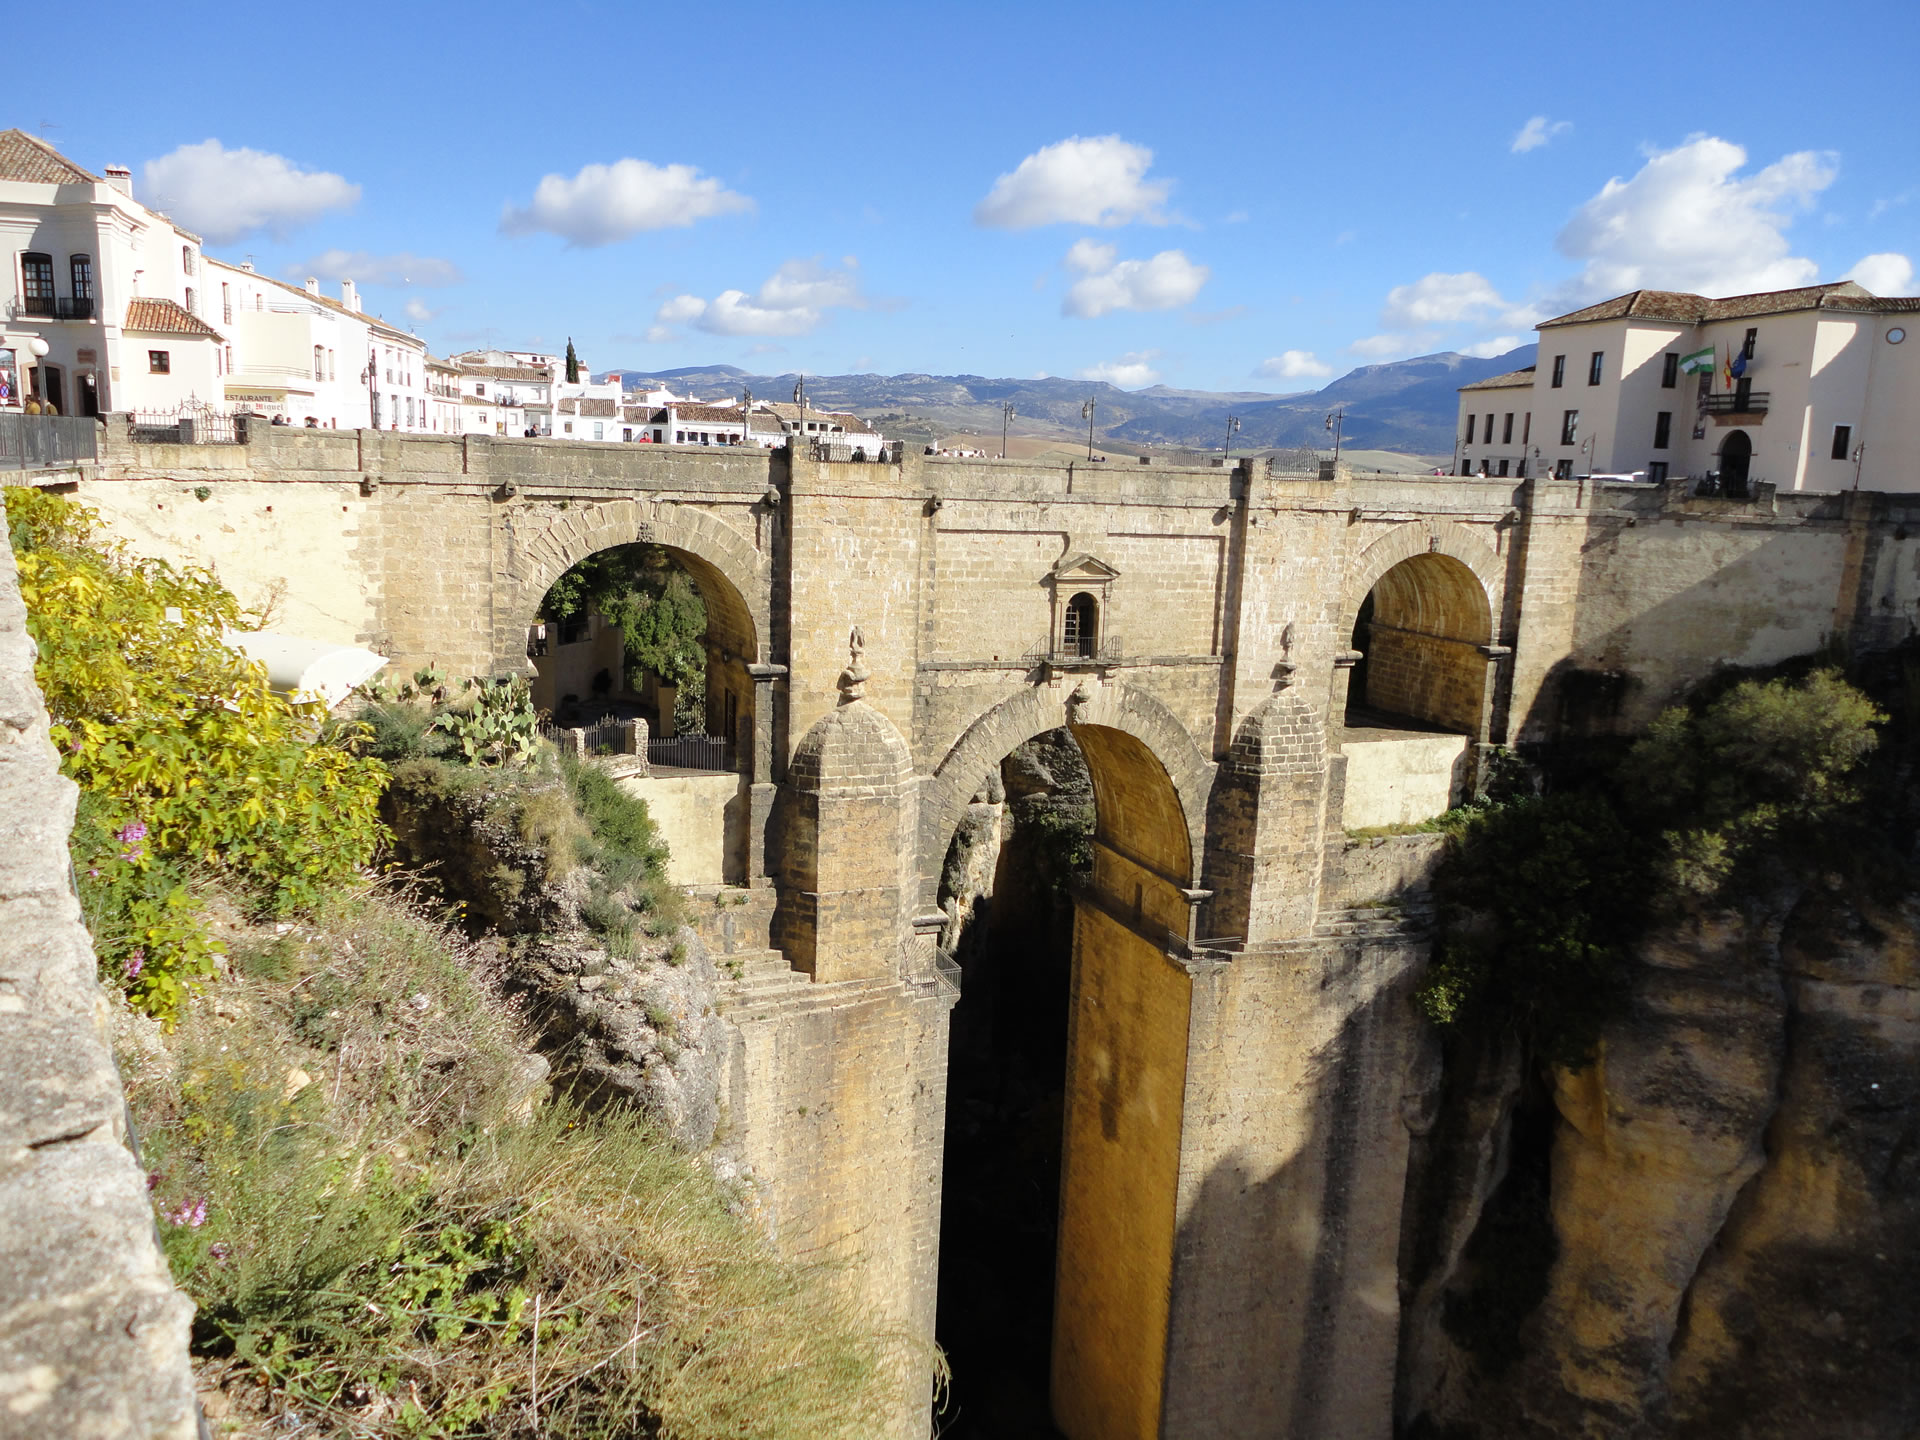 Ronda - a historic old town in the province of Malaga